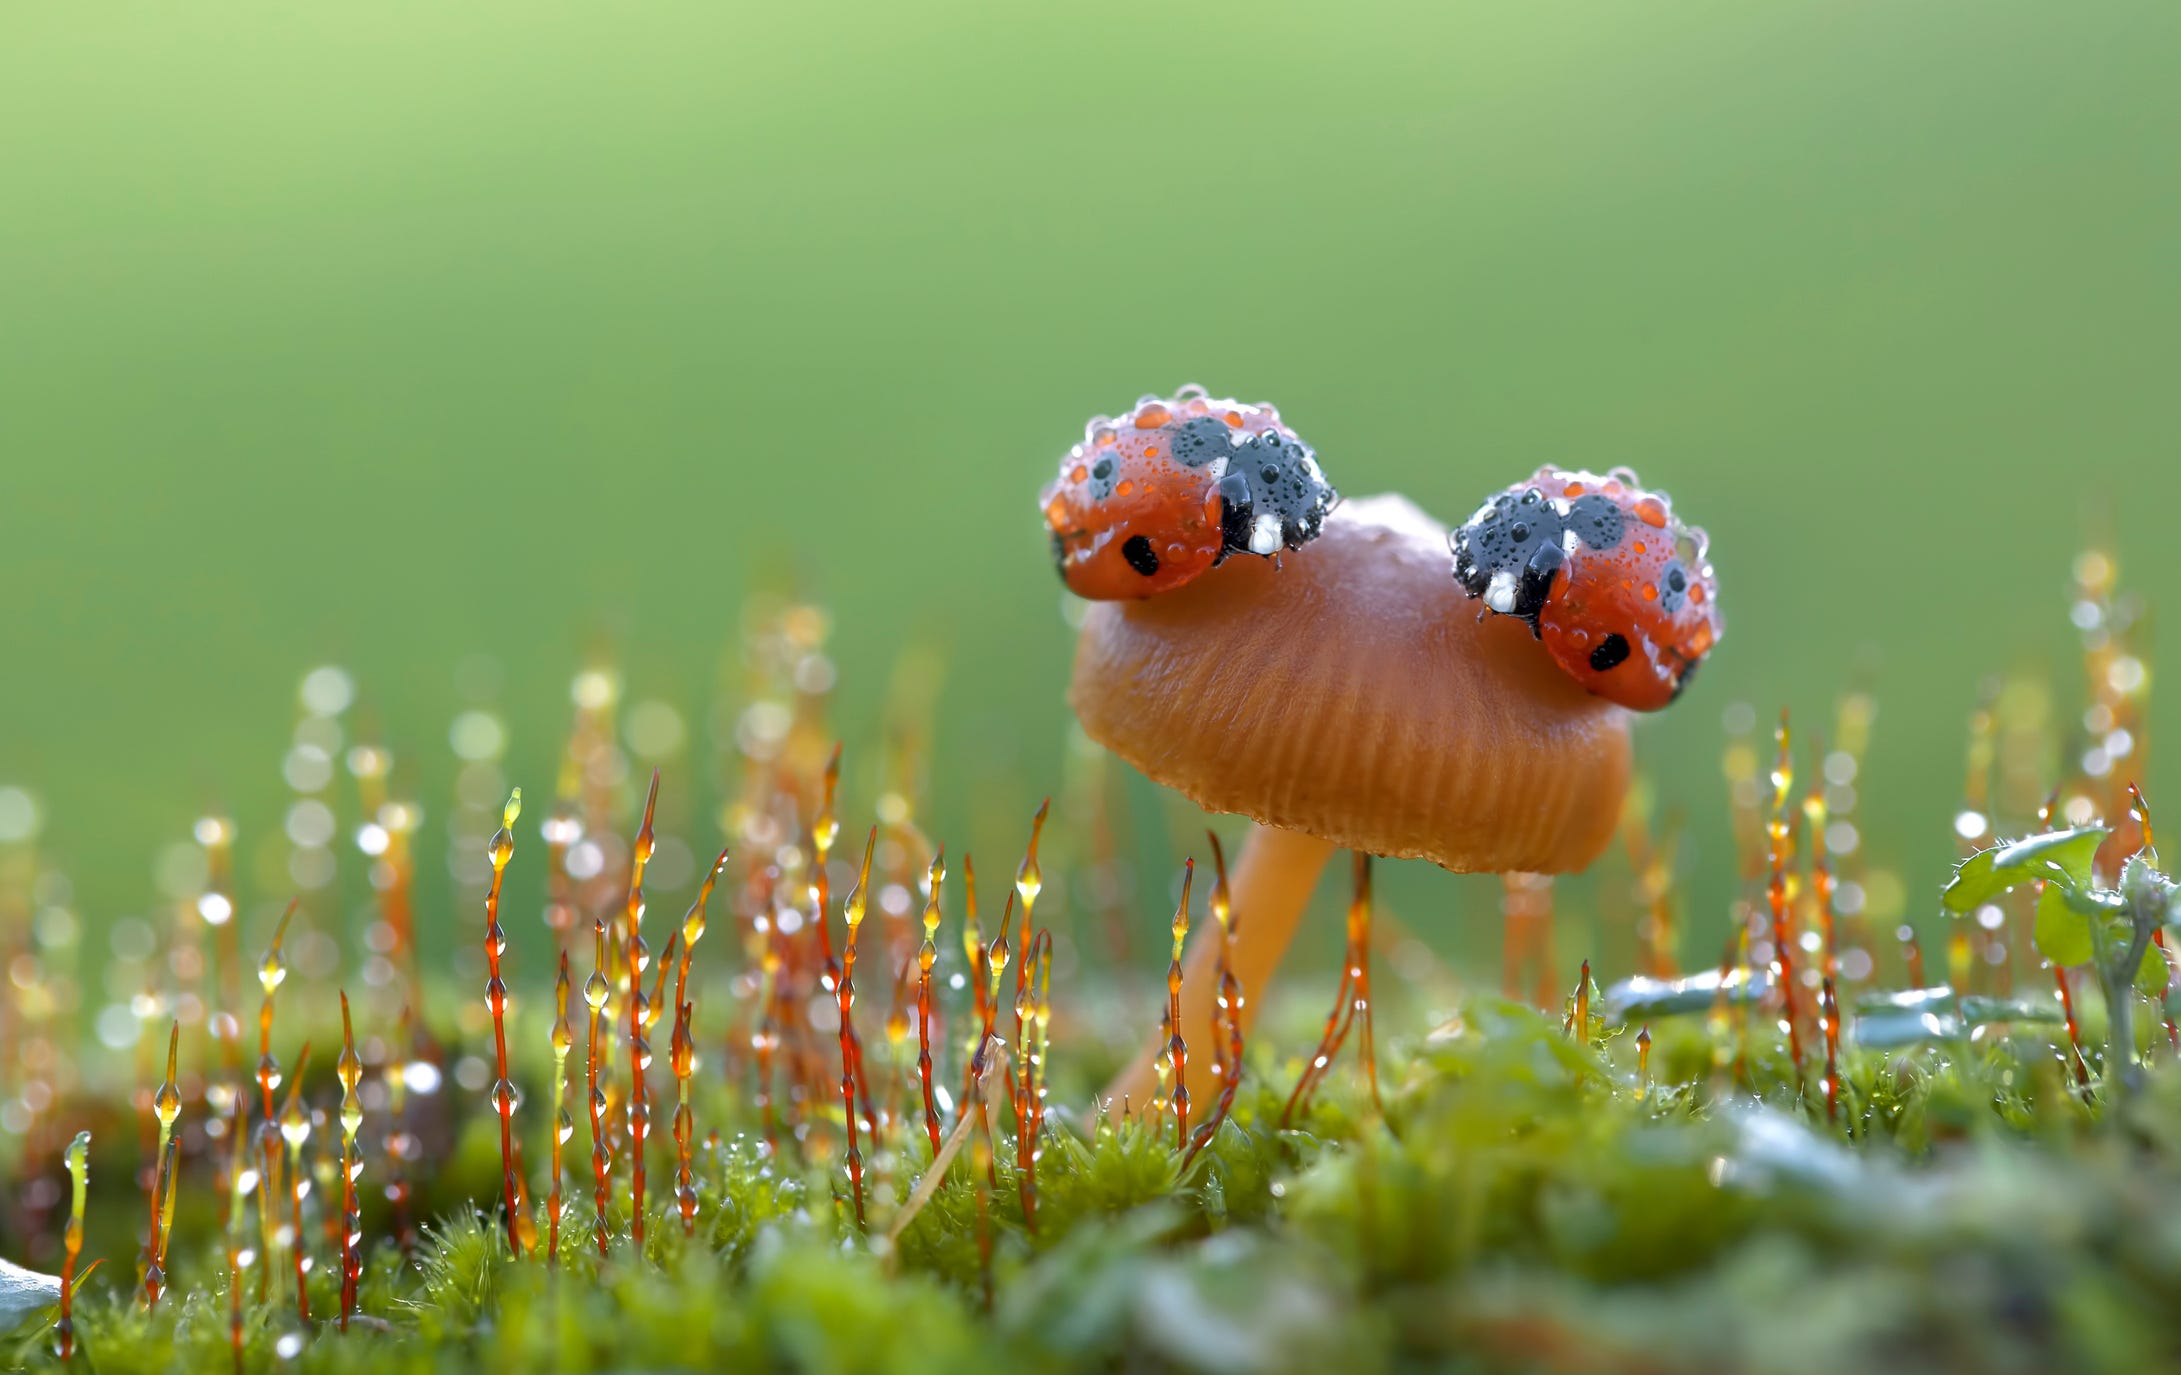 What Does It Really Mean When You See A Ladybug?